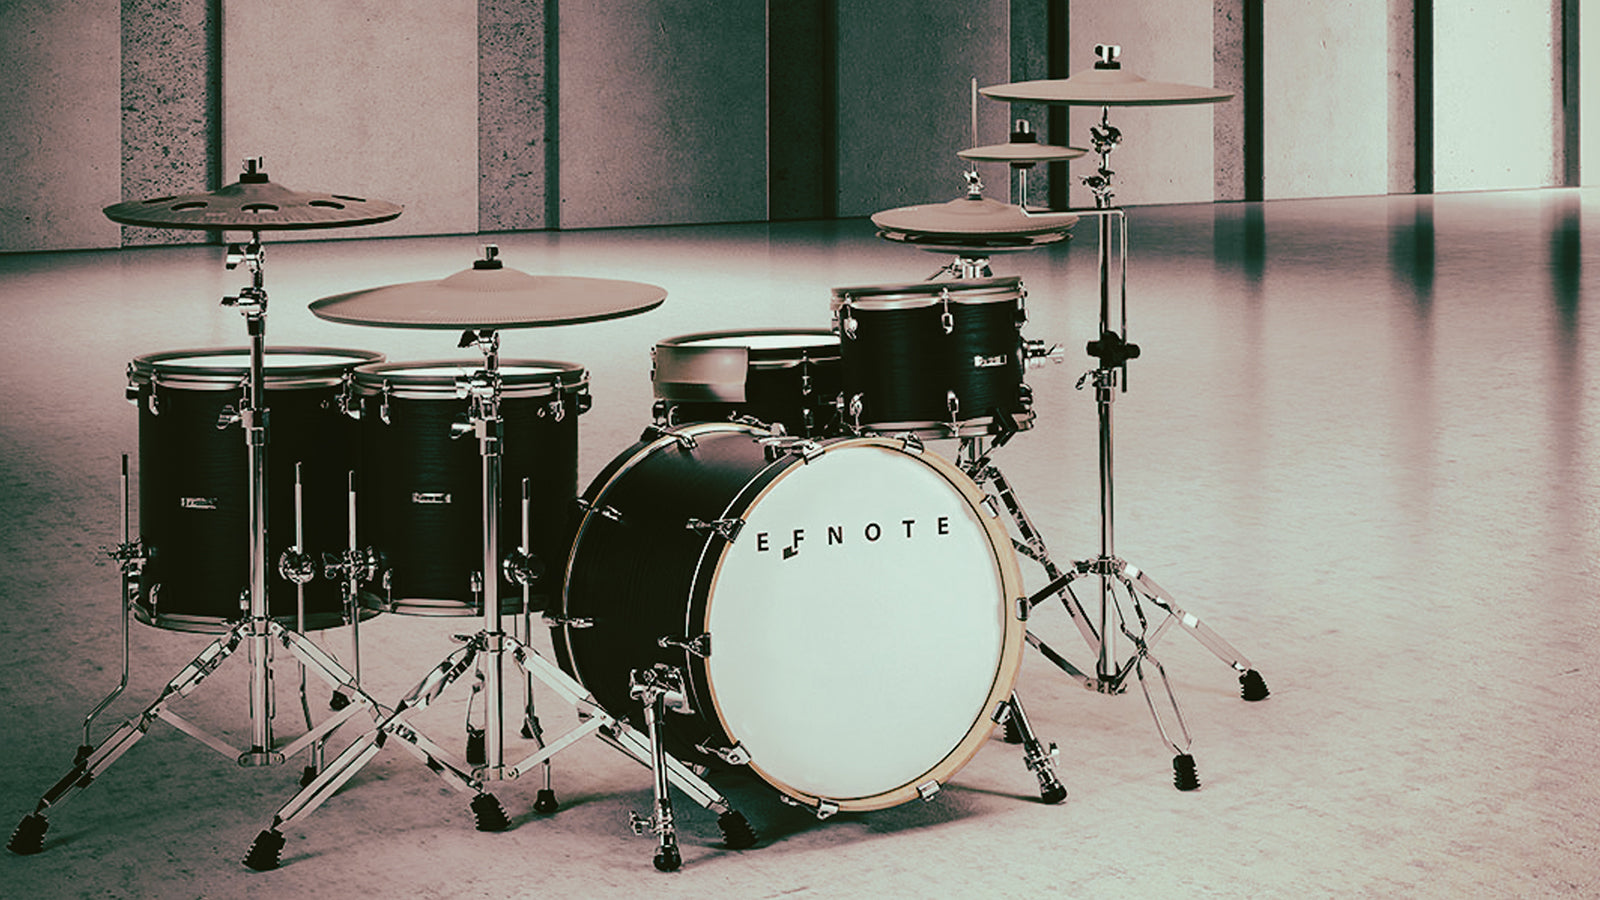 An Efnote 7x drum set in a large warehouse space